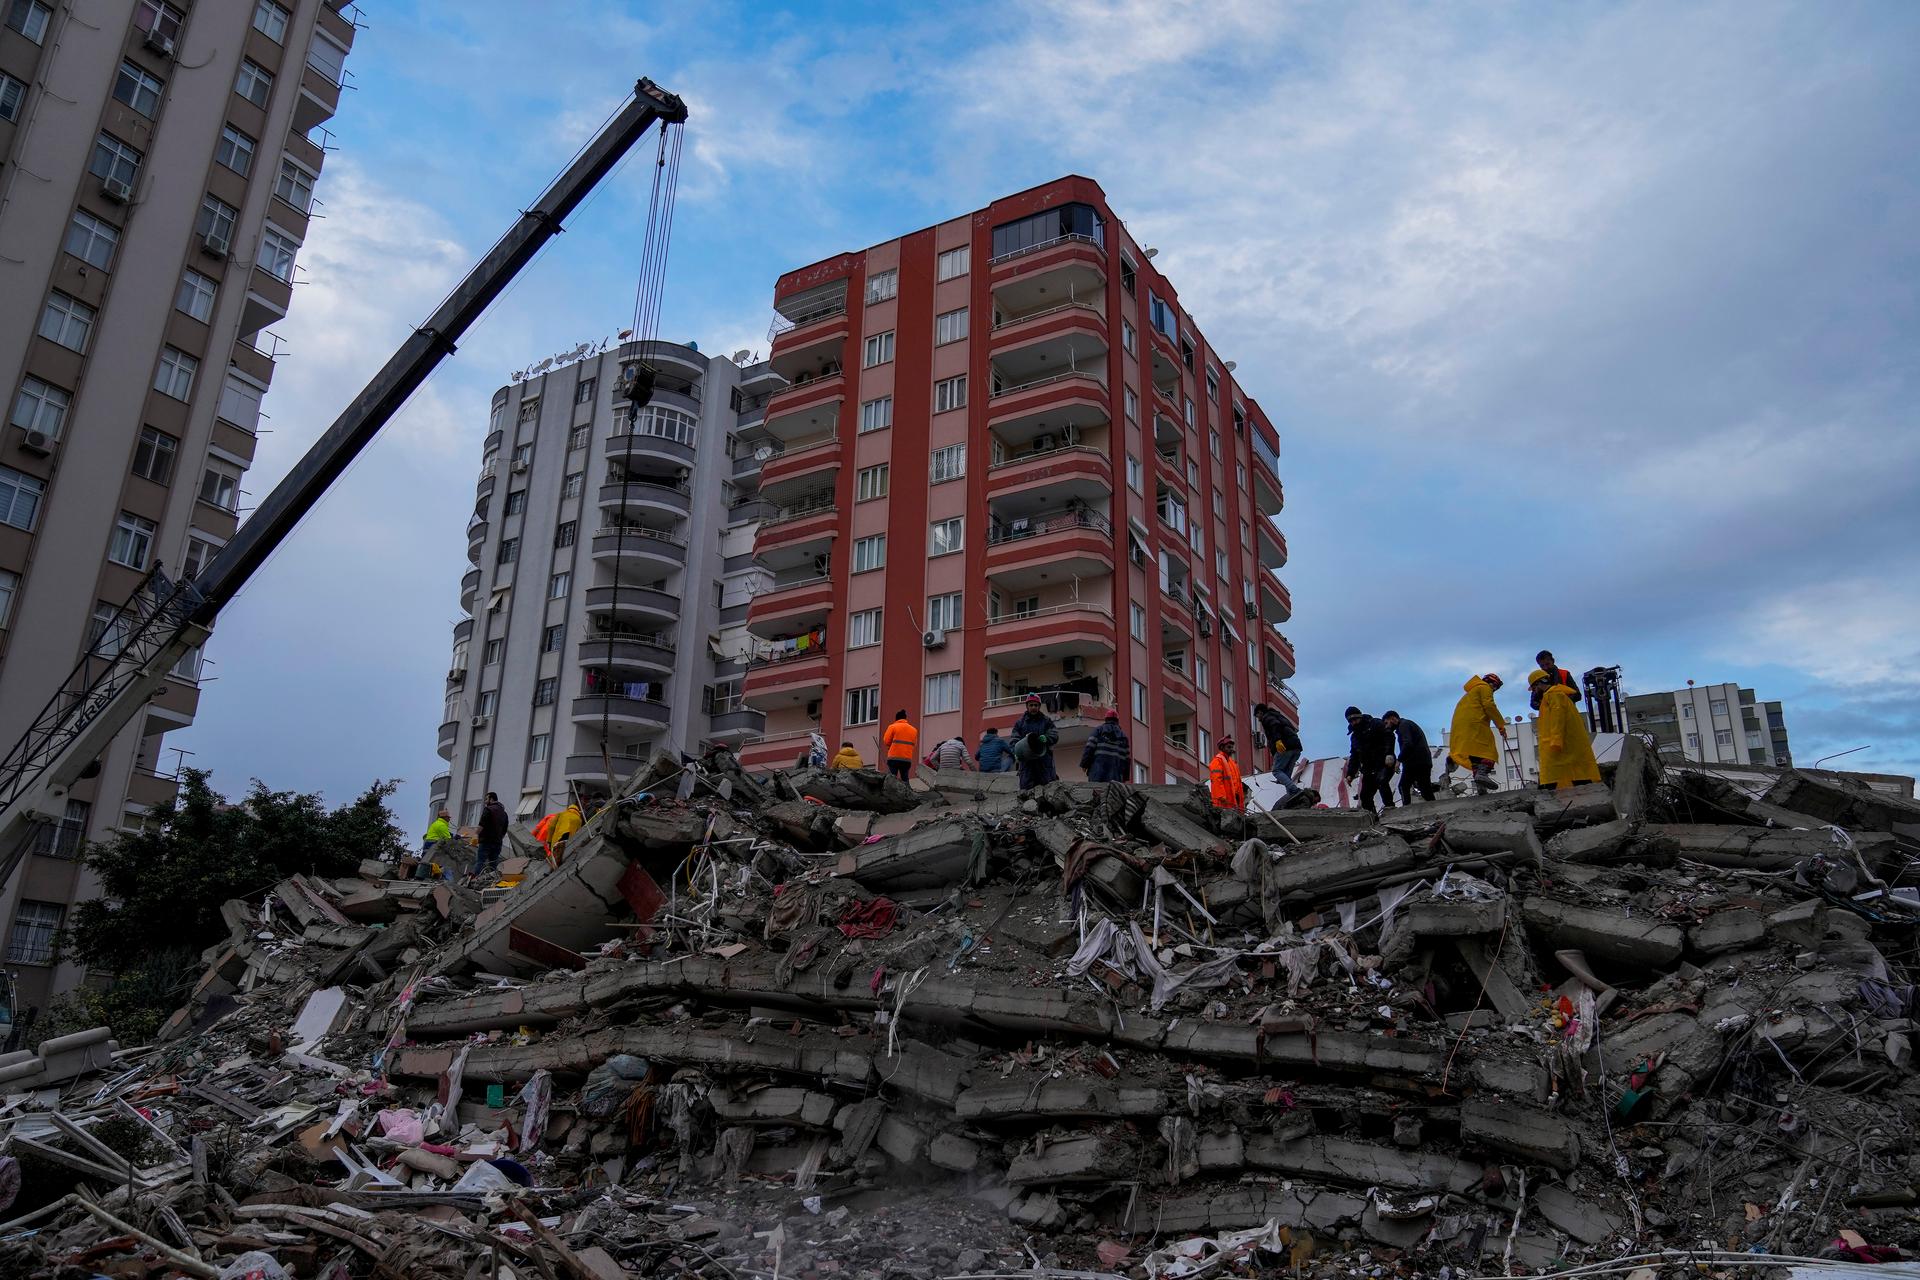 Emergency teams search for people in a destroyed building in Adana, Turkey, after a powerful quake knocked down multiple buildings, Feb. 6, 2023.